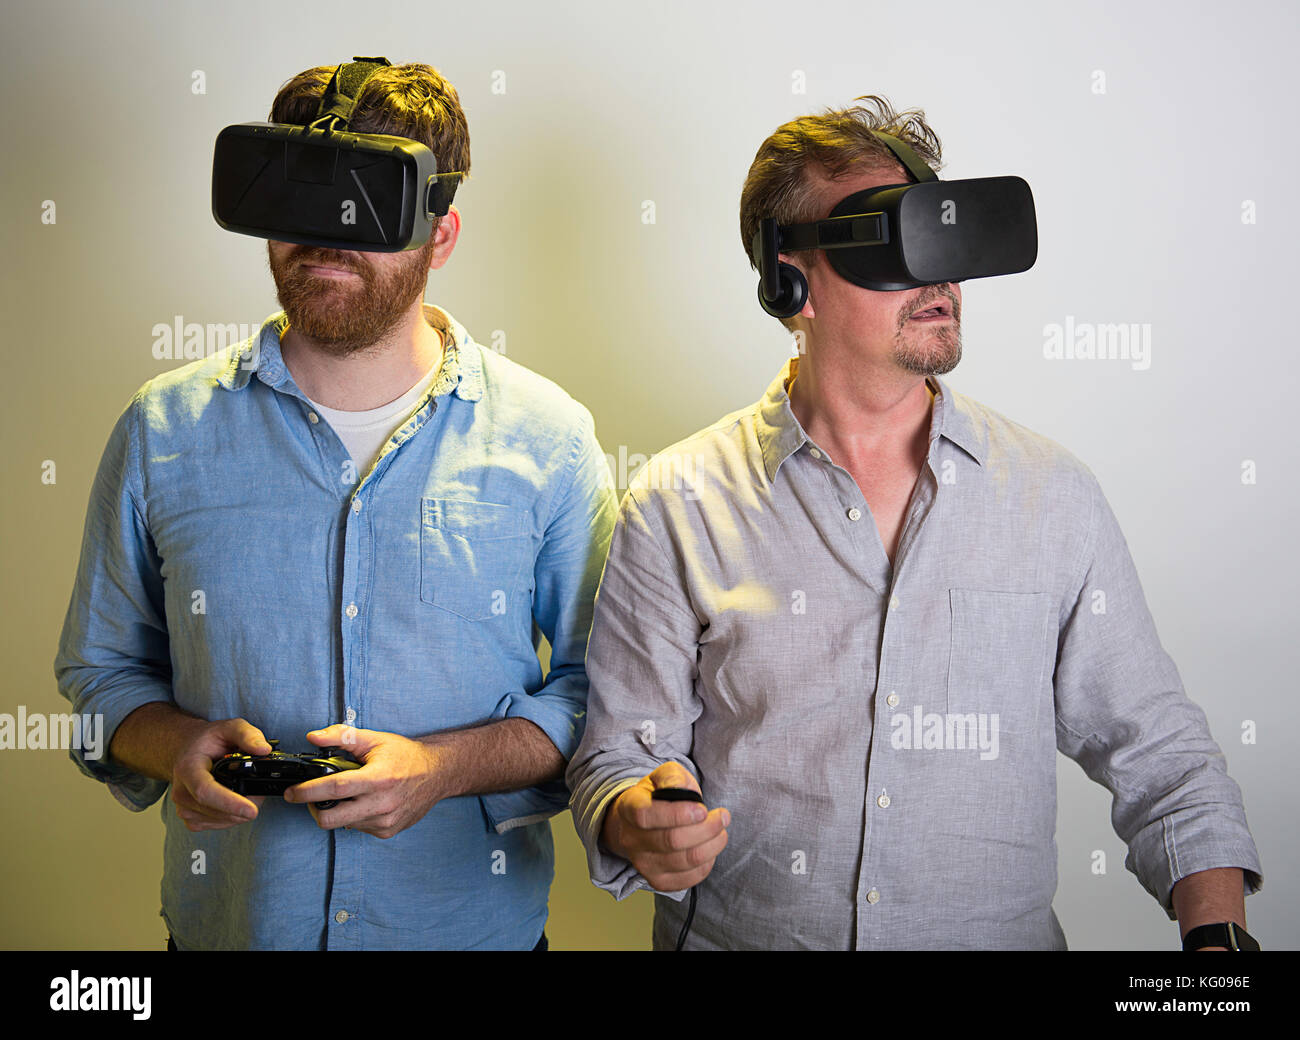 Two men using the Oculus Rift VR headsets, version 2 and 3. Stock Photo